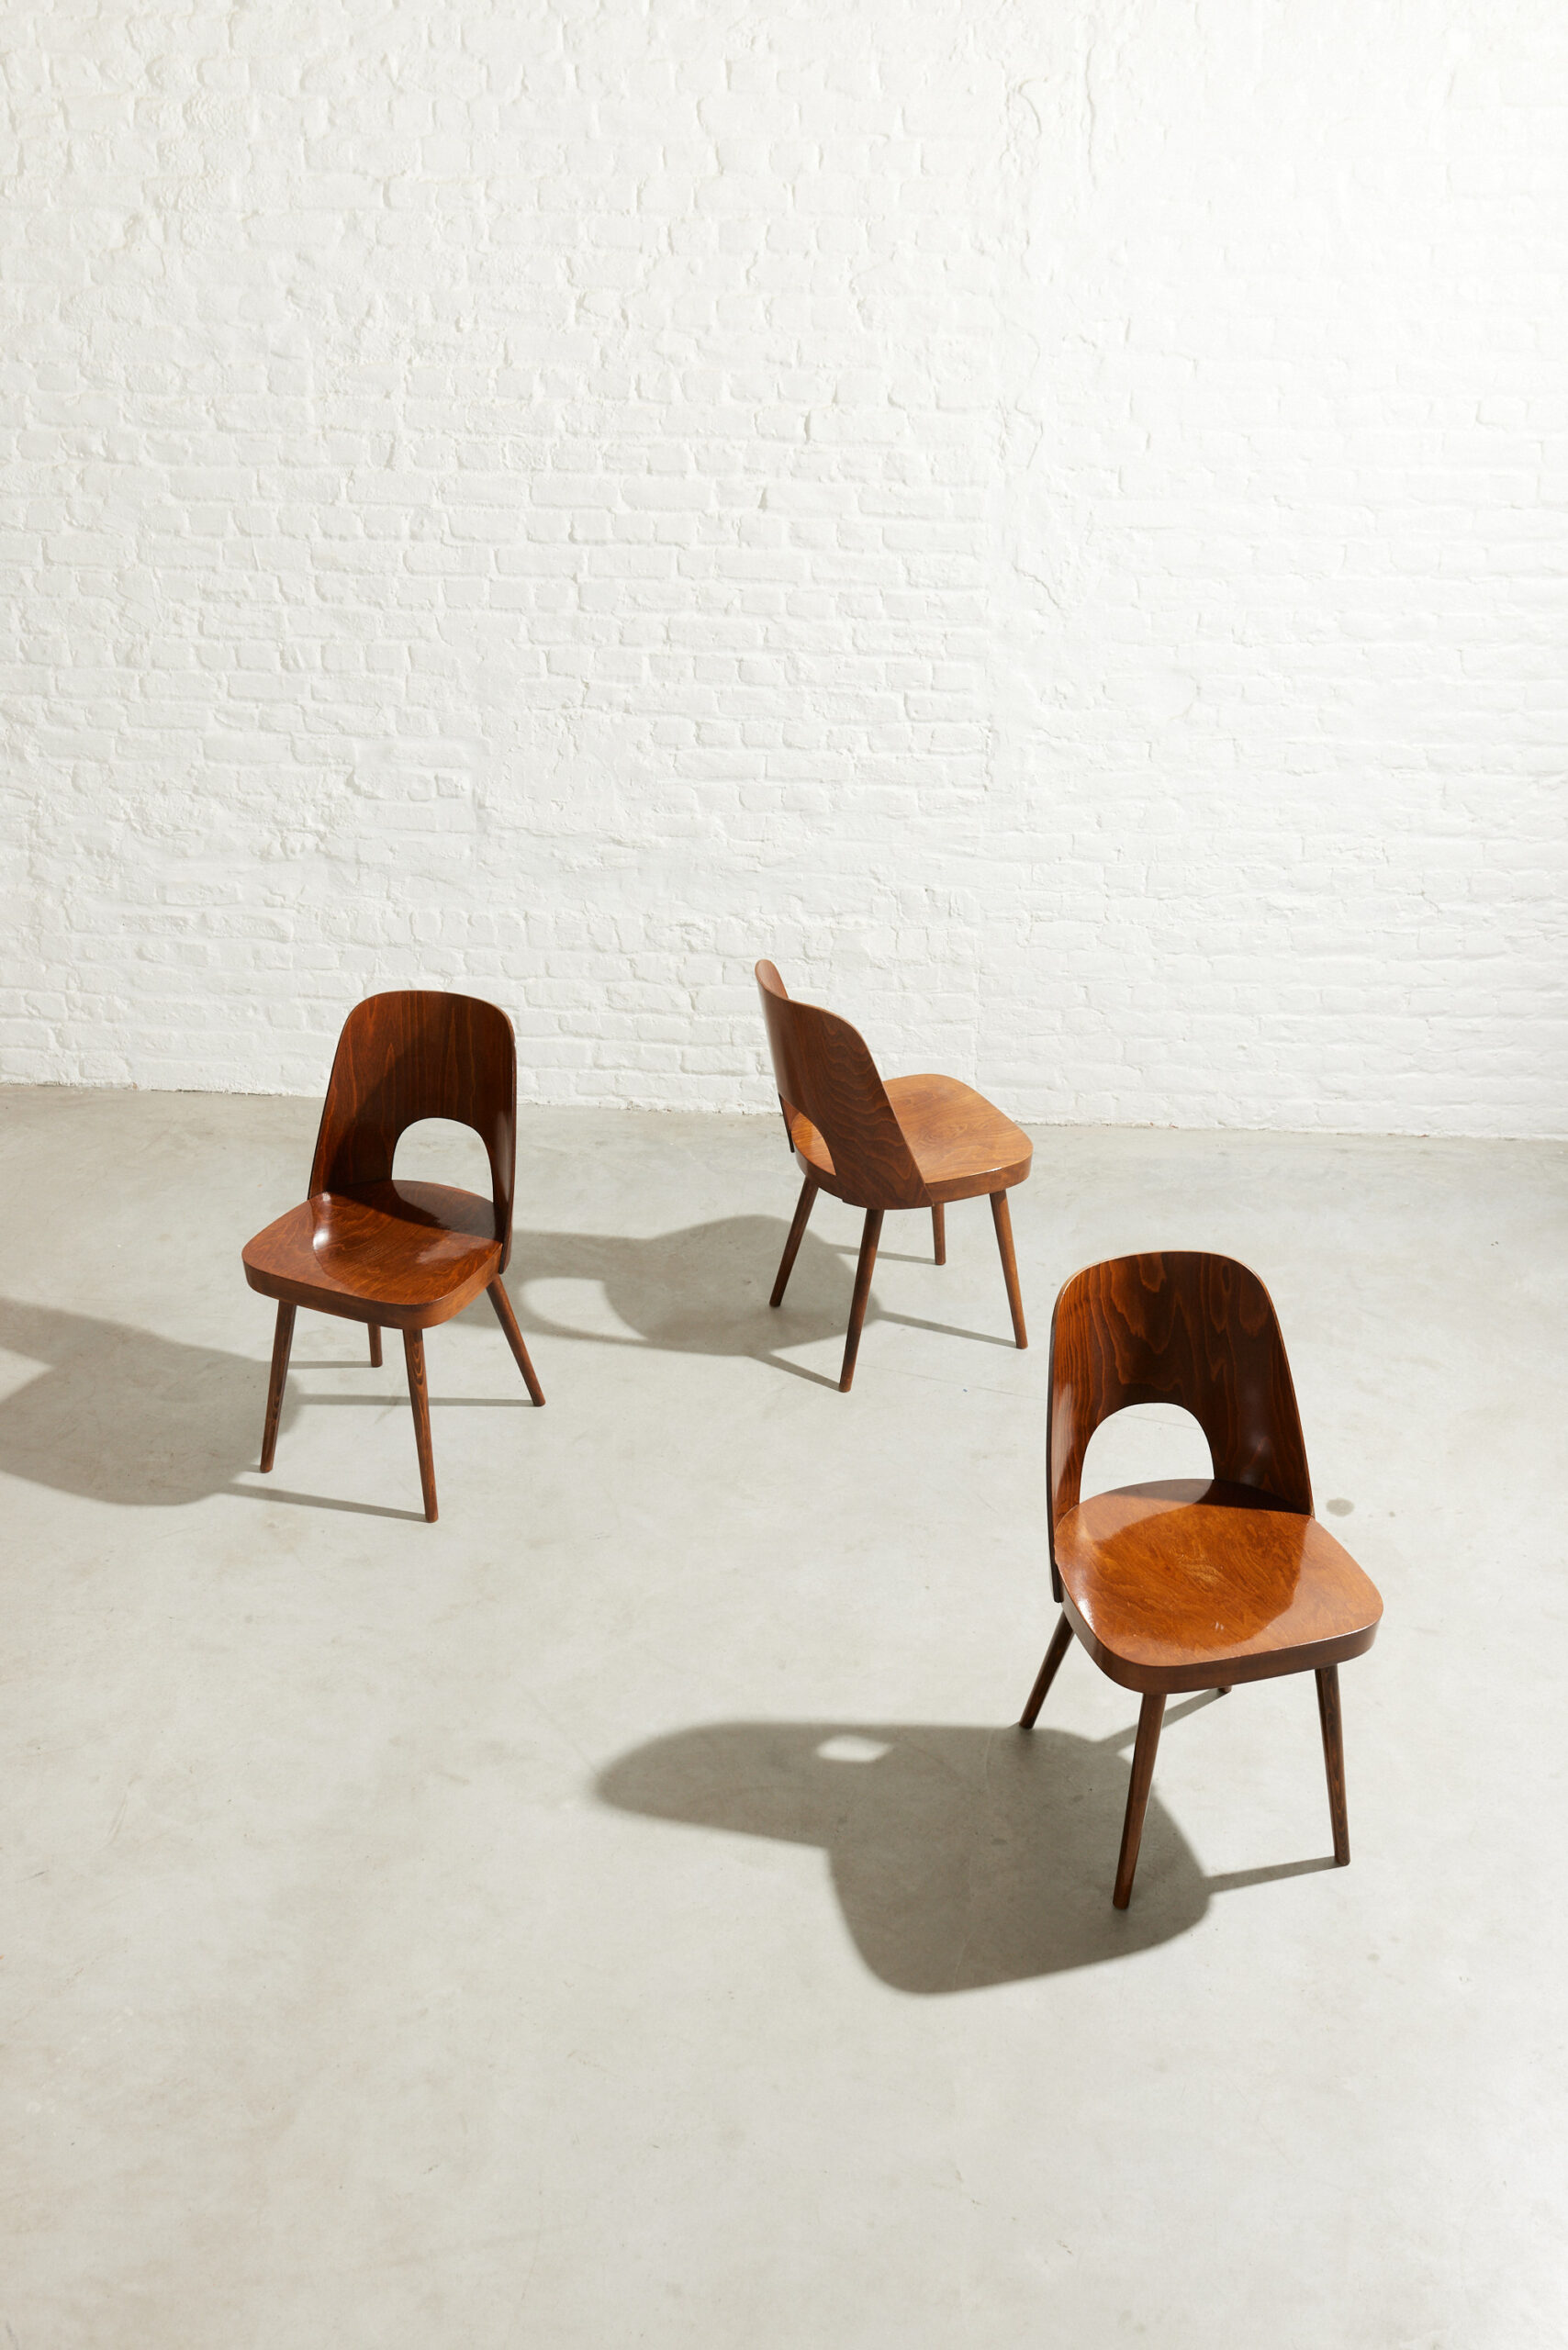 Set of 3 "No. 515" dining chairs by Oswald Haerdtl